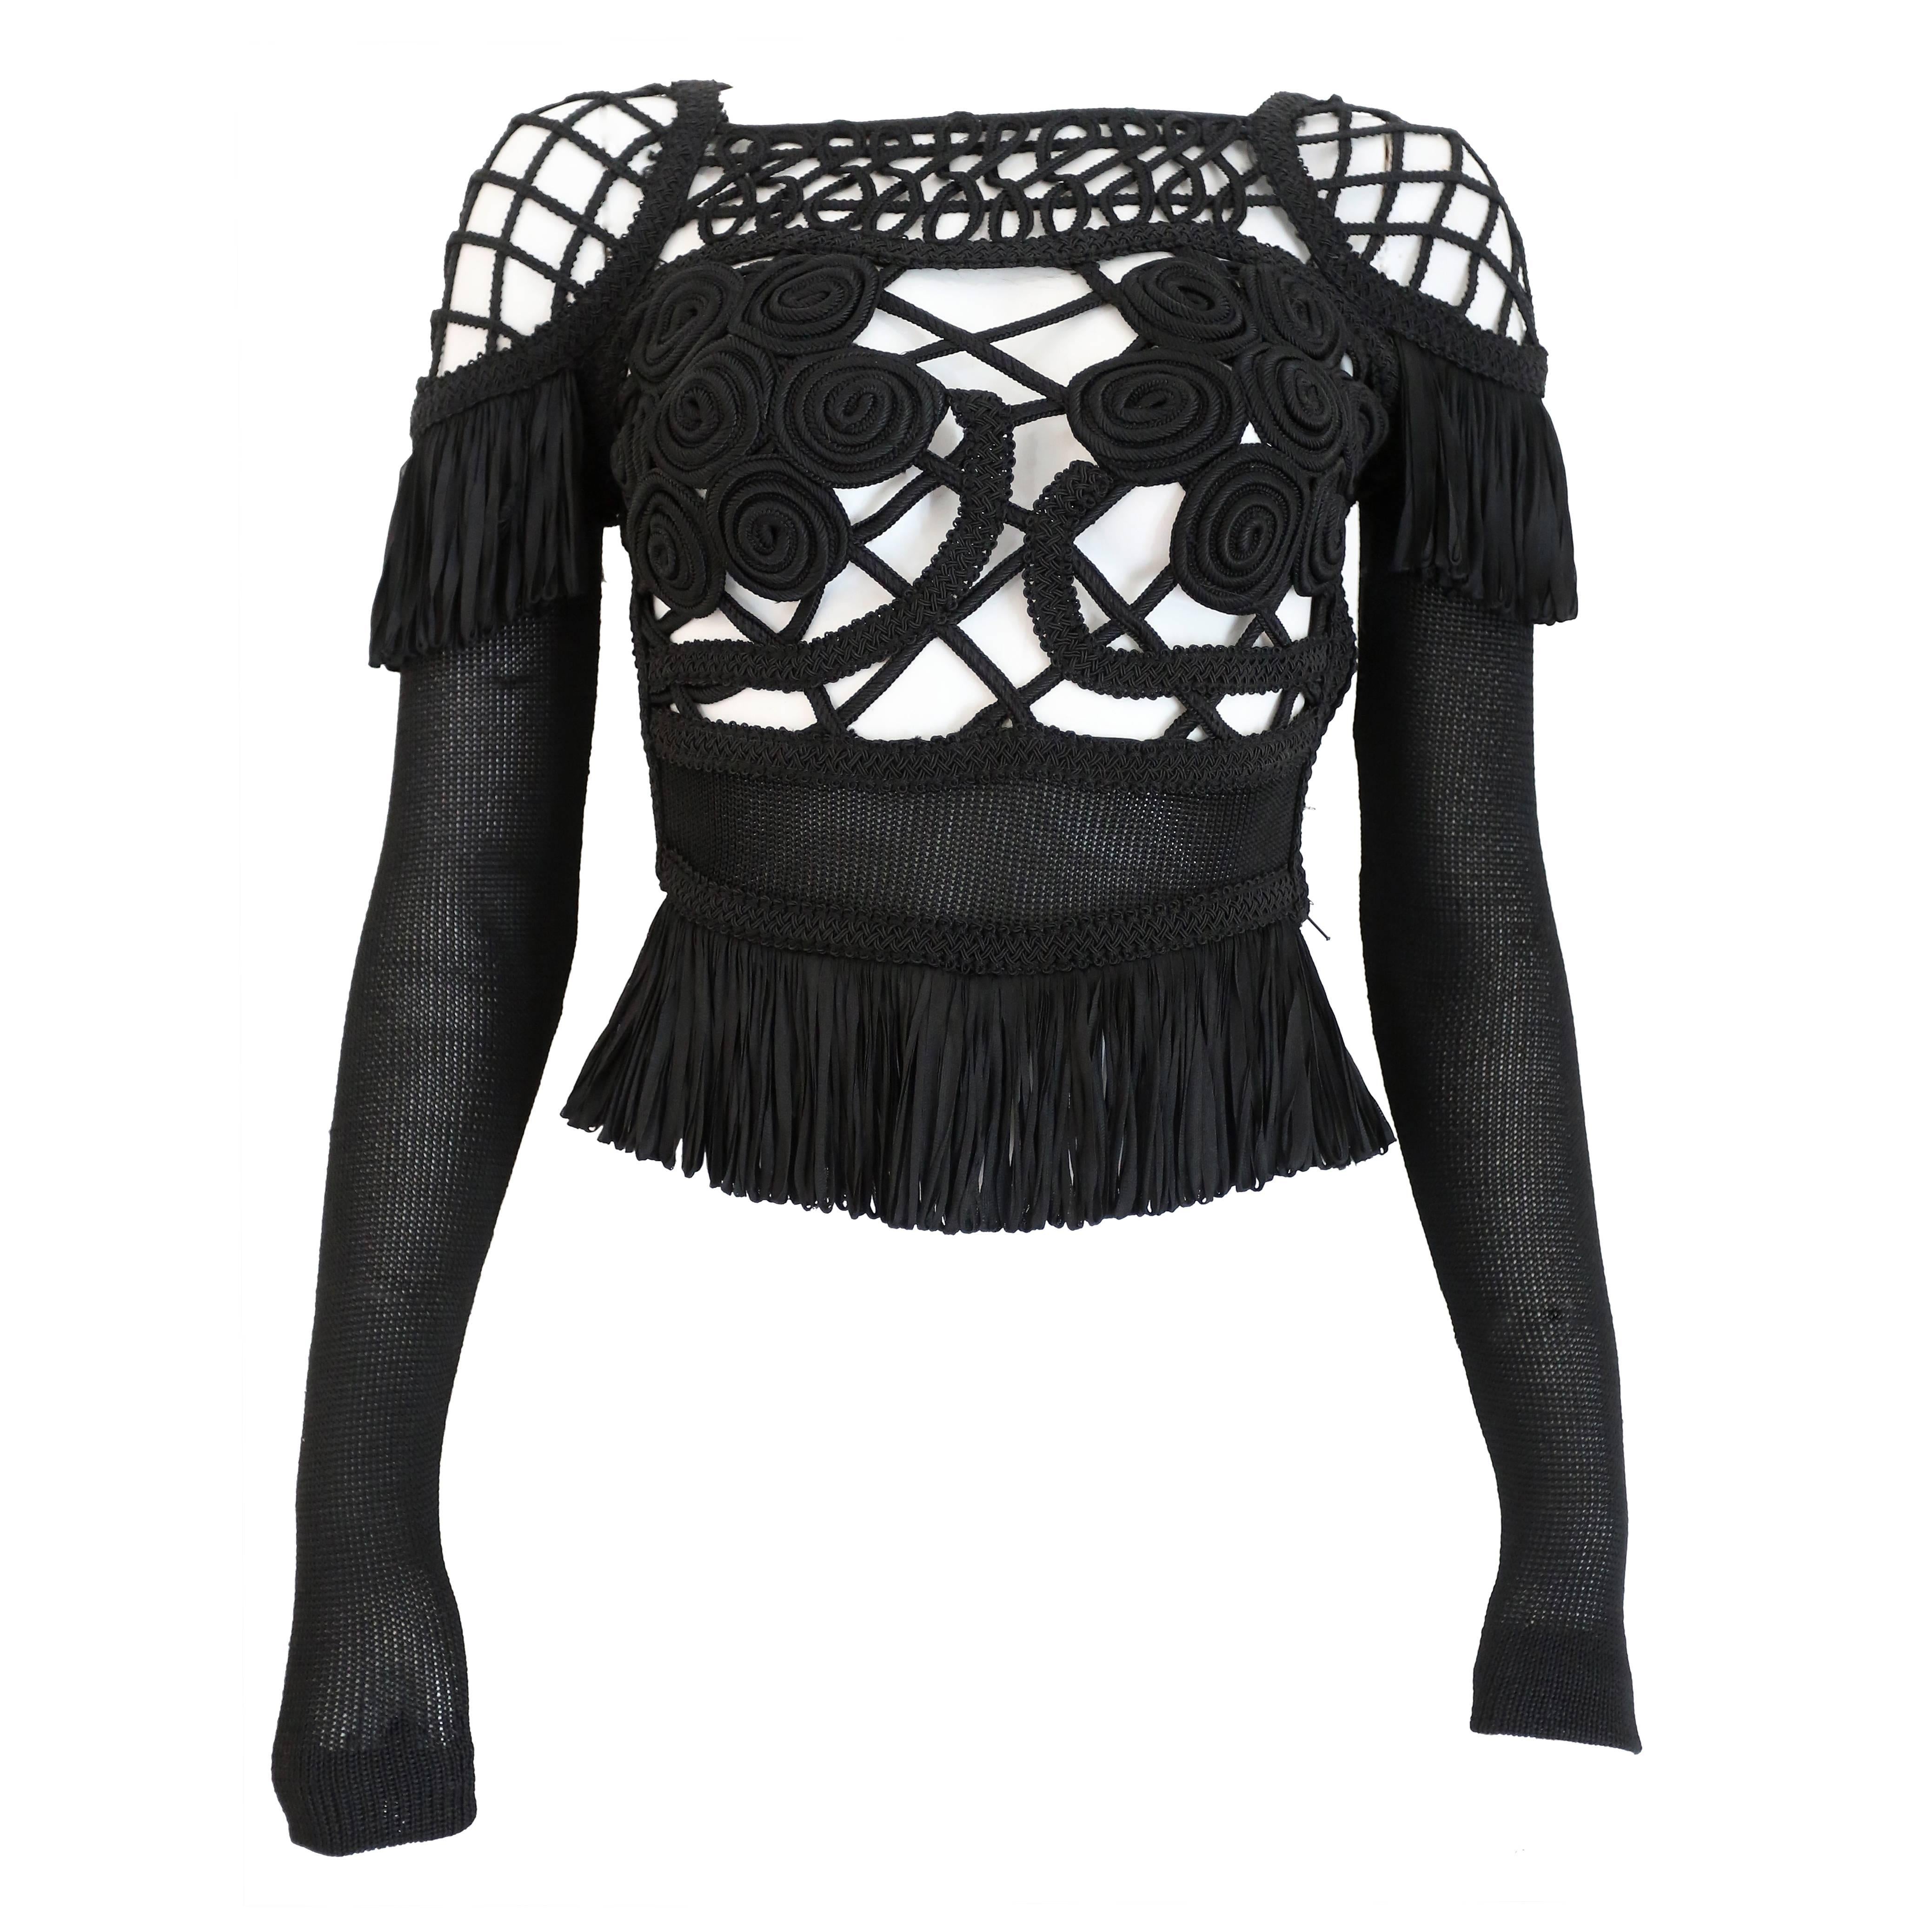 Christian Lacroix knitted caged evening sweater, c. 1990s